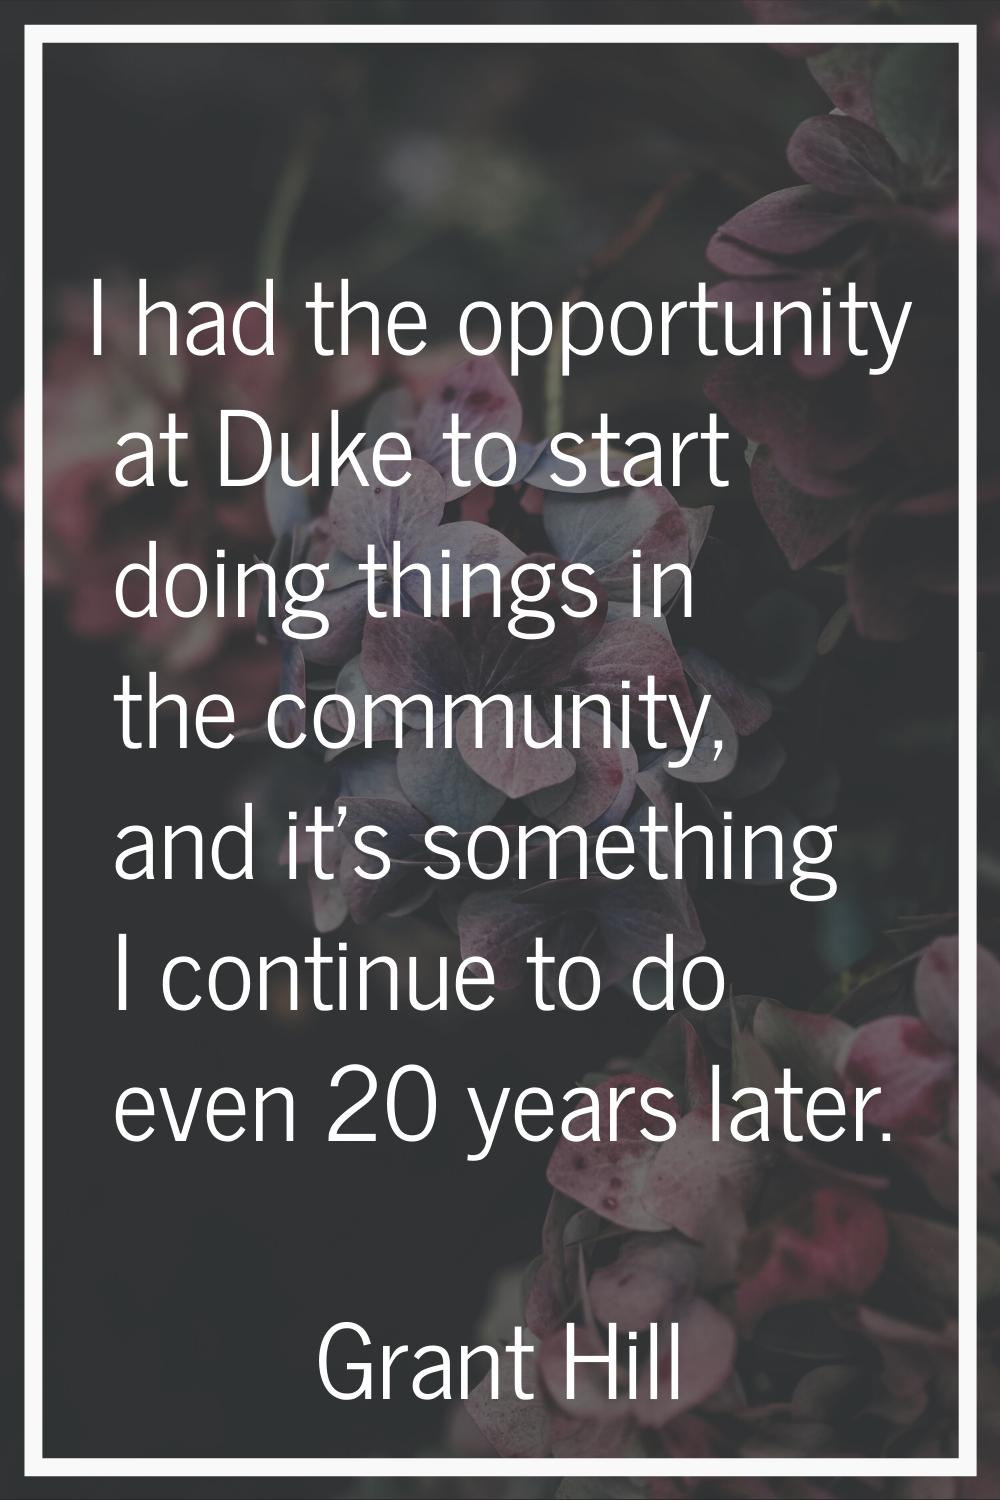 I had the opportunity at Duke to start doing things in the community, and it's something I continue